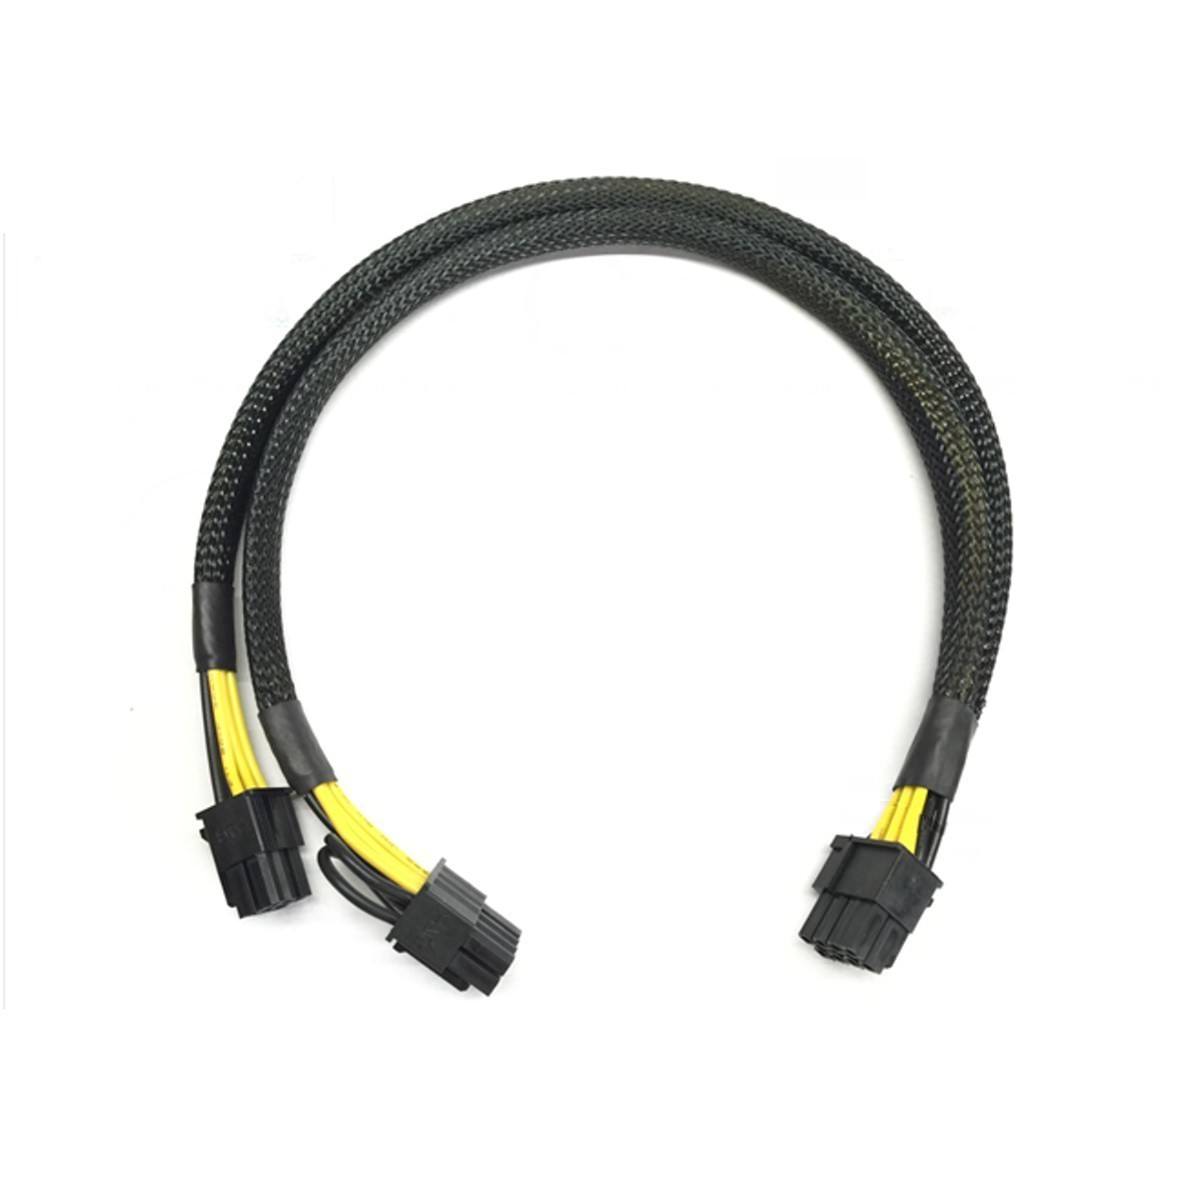 8pin to 8+8pin Power Adapter Cable for DELL R420 and GPU Video Card 35cm 